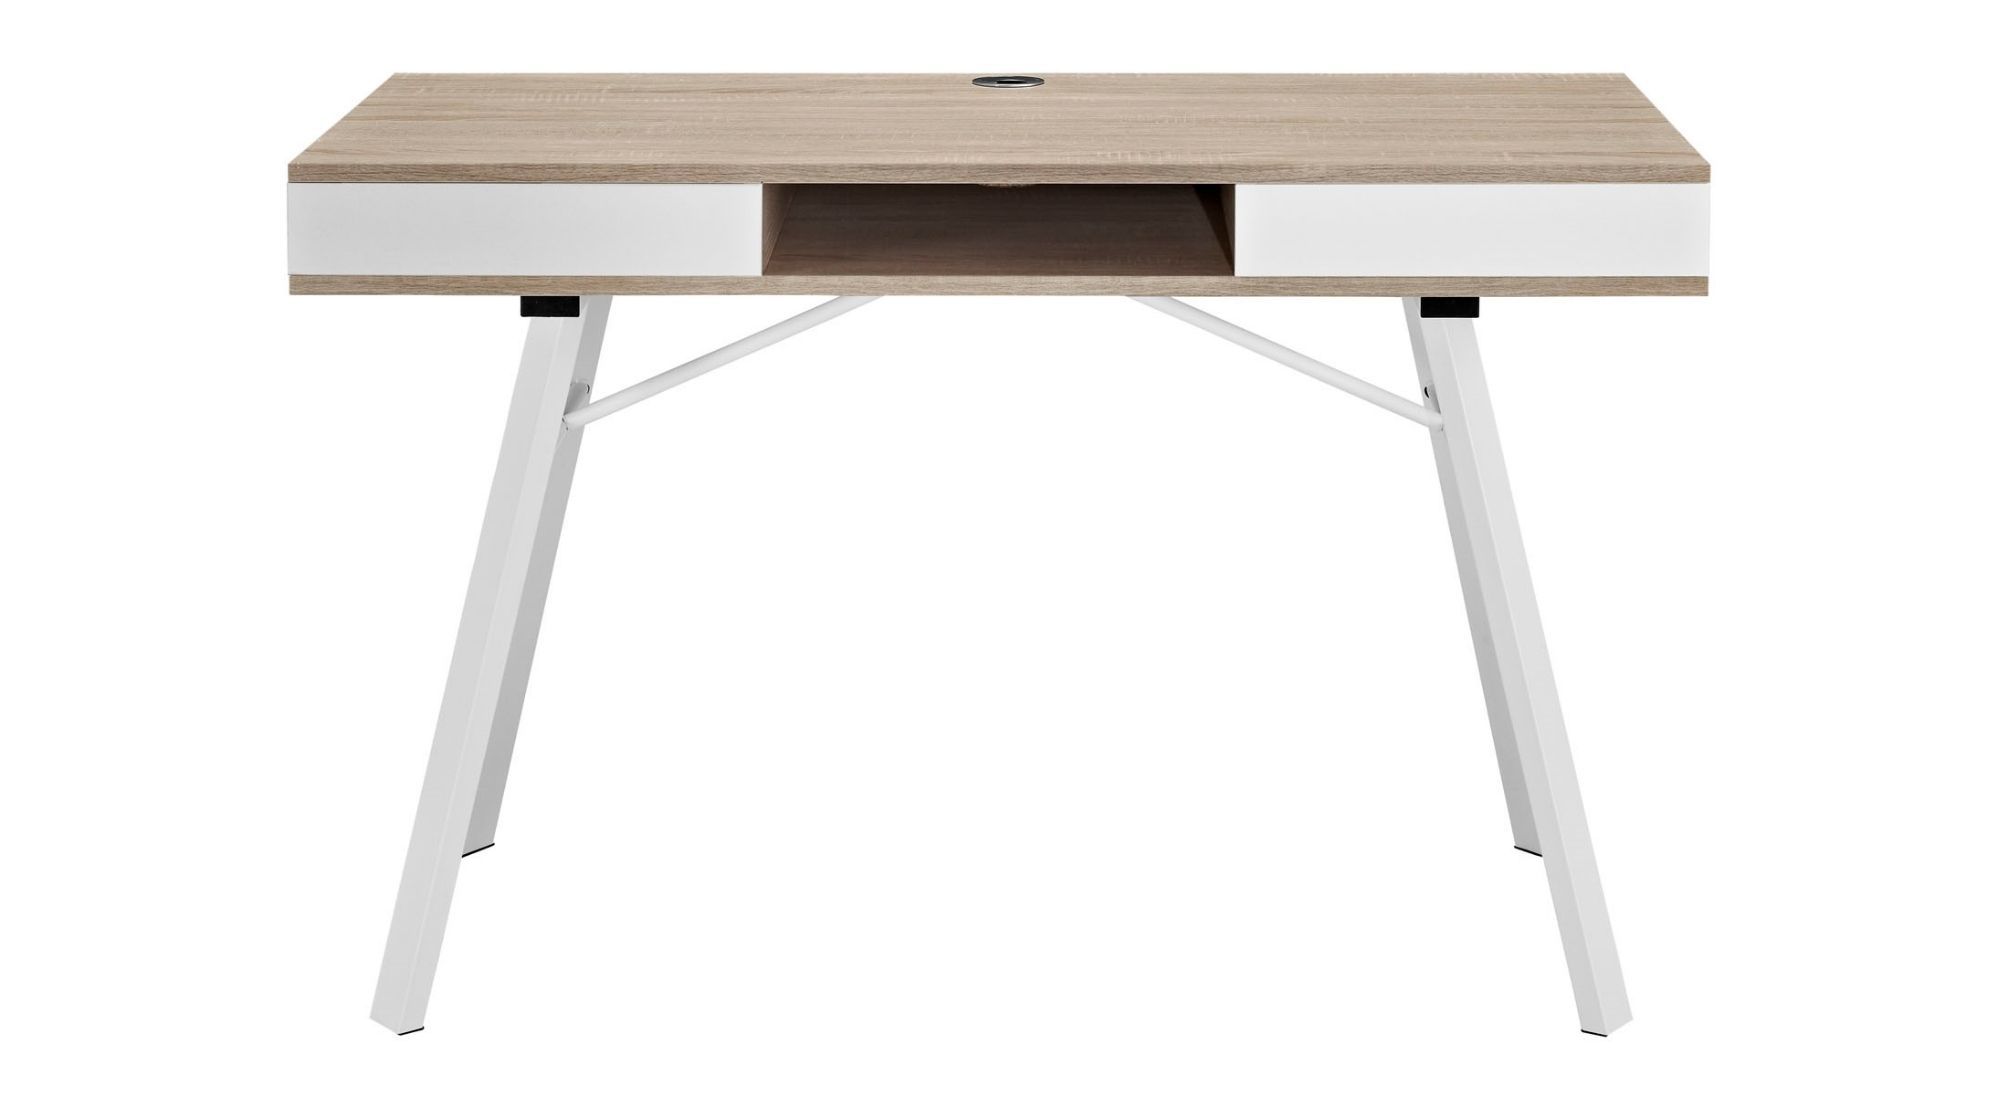 Stir Office Desk from LexMod that's perfect for small spaces